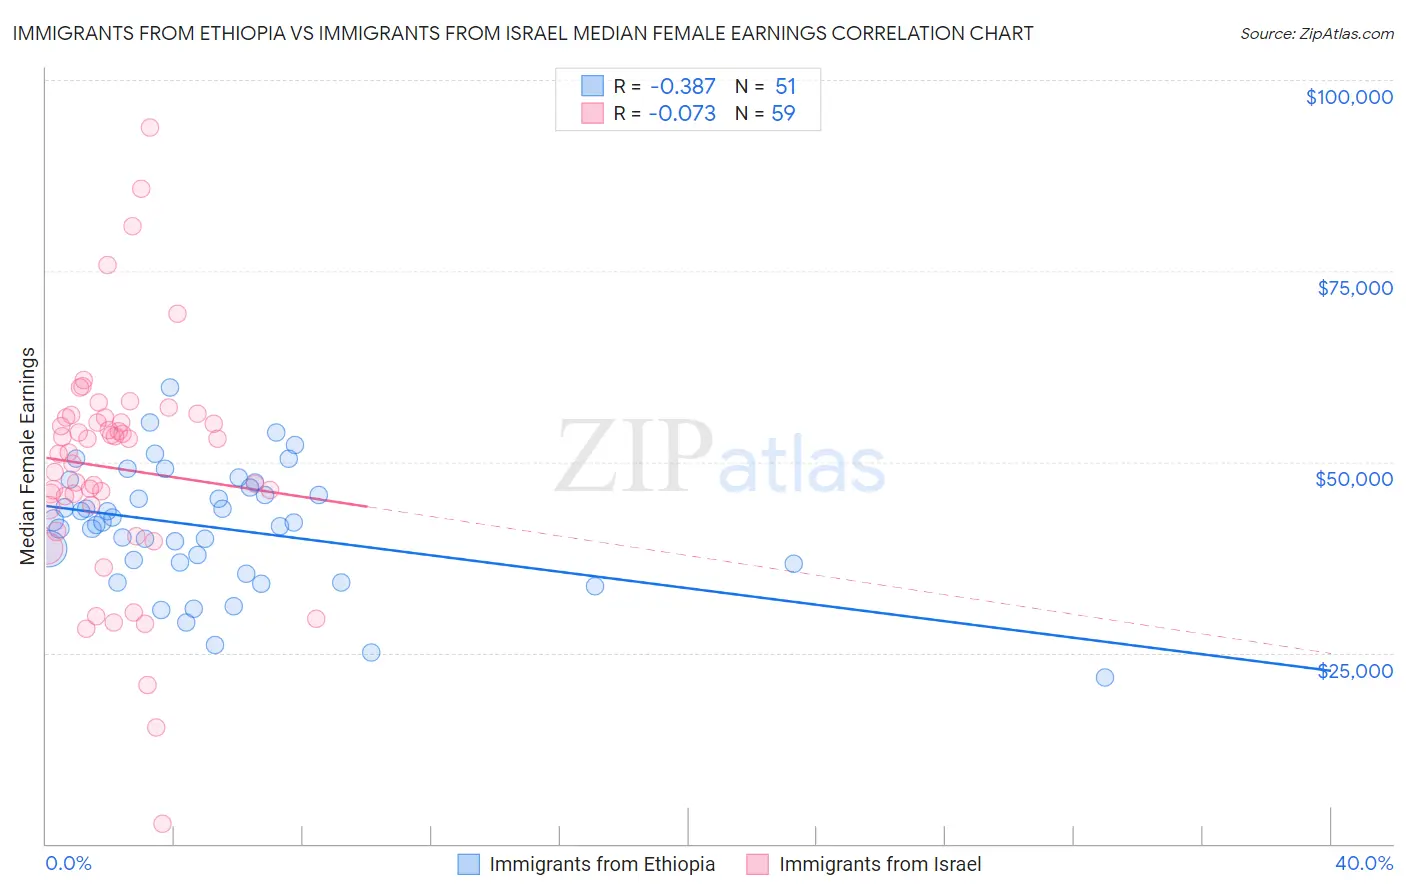 Immigrants from Ethiopia vs Immigrants from Israel Median Female Earnings